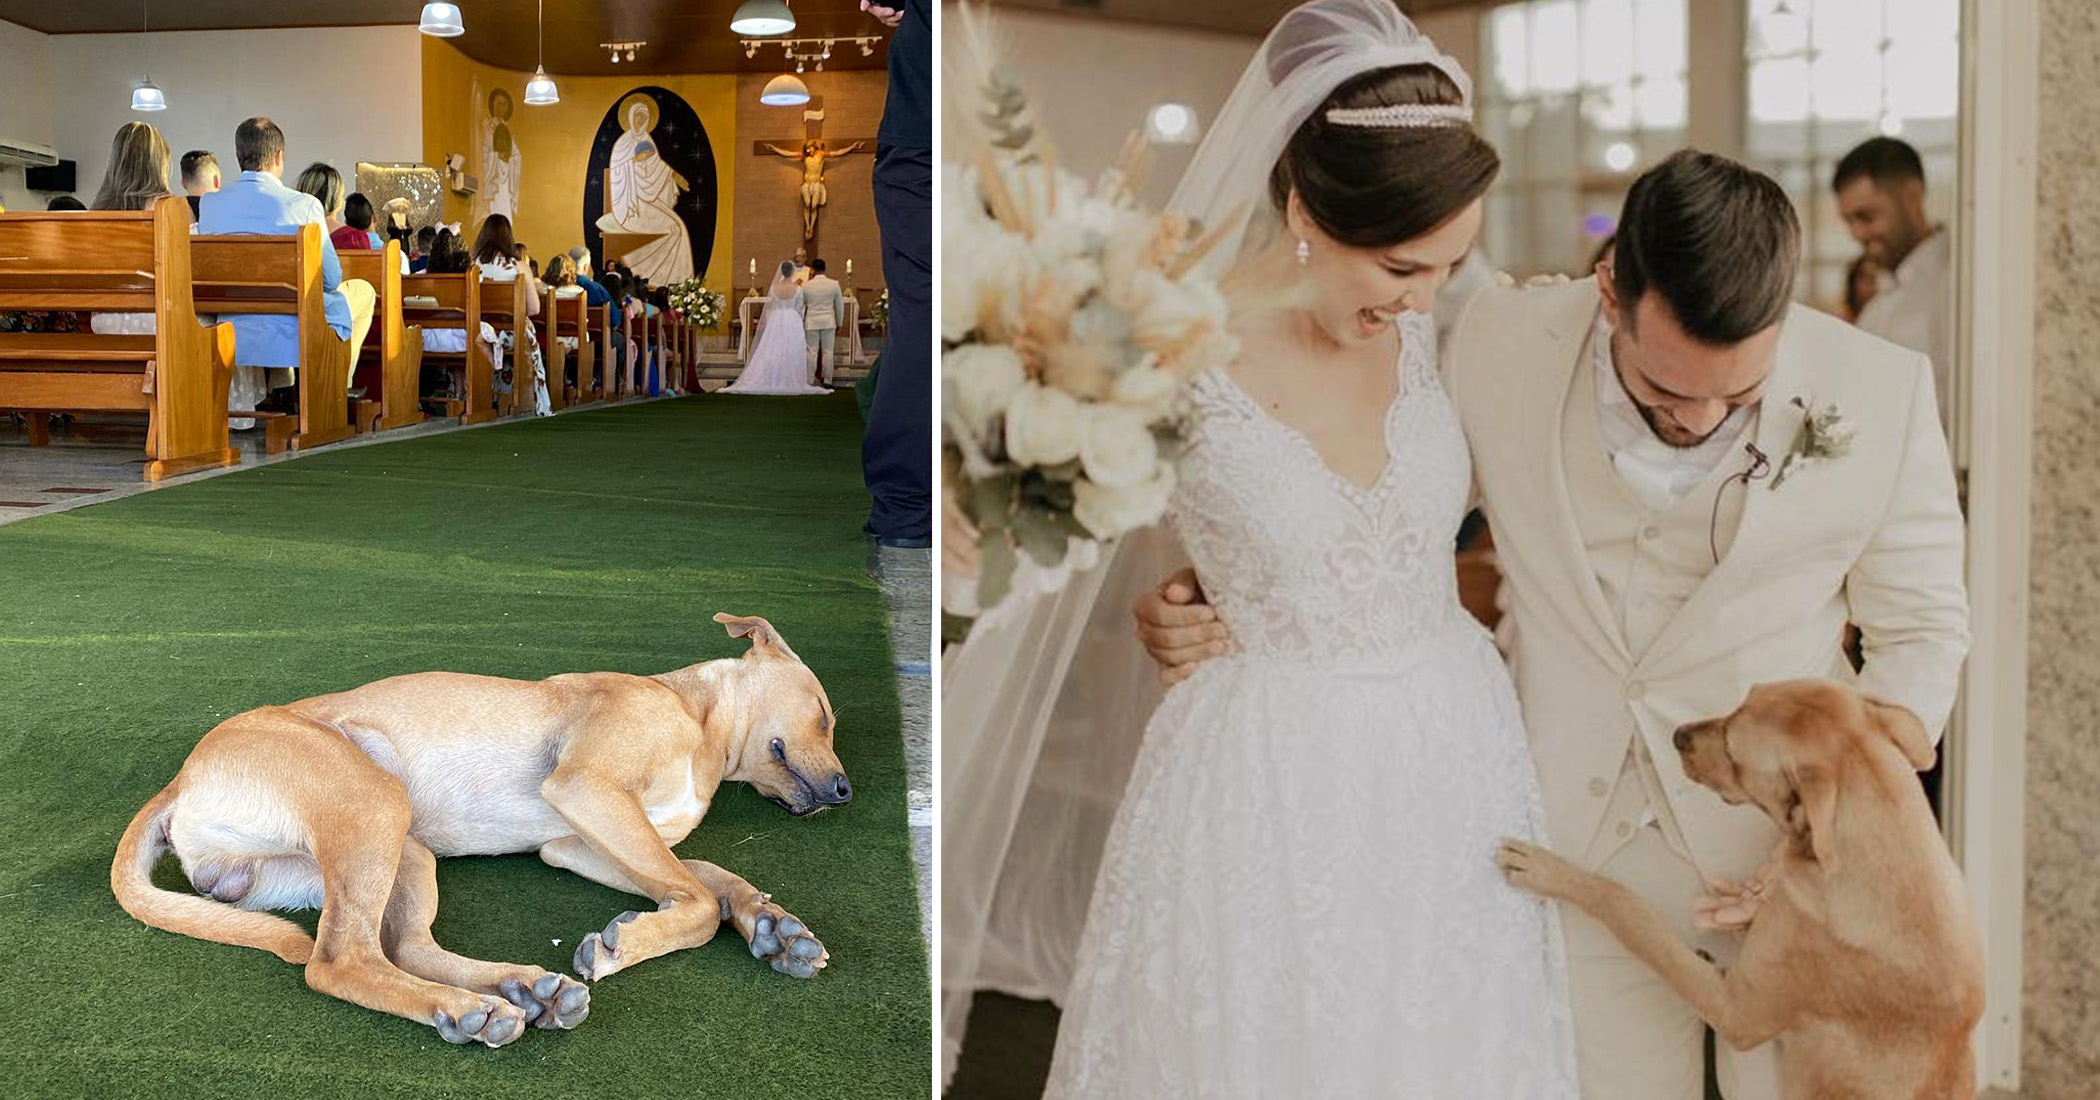 Newlywed Couple Adopts the Stray Dog That Crashed Their Wedding Ceremony